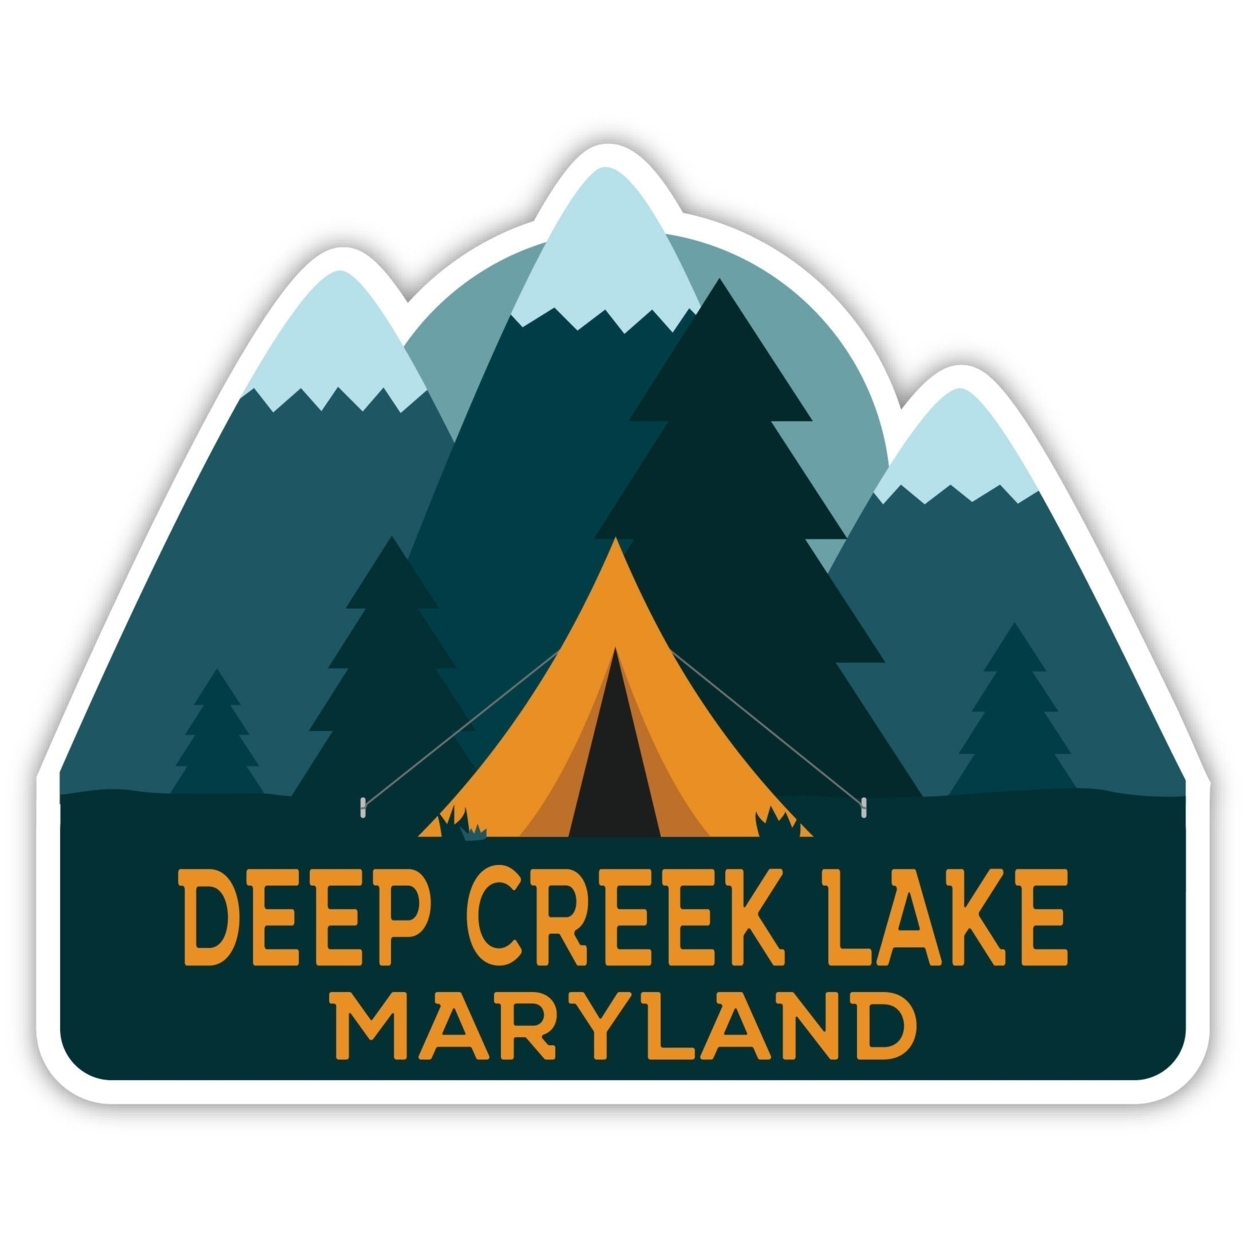 Deep Creek Lake Maryland Souvenir Decorative Stickers (Choose Theme And Size) - 4-Pack, 10-Inch, Tent